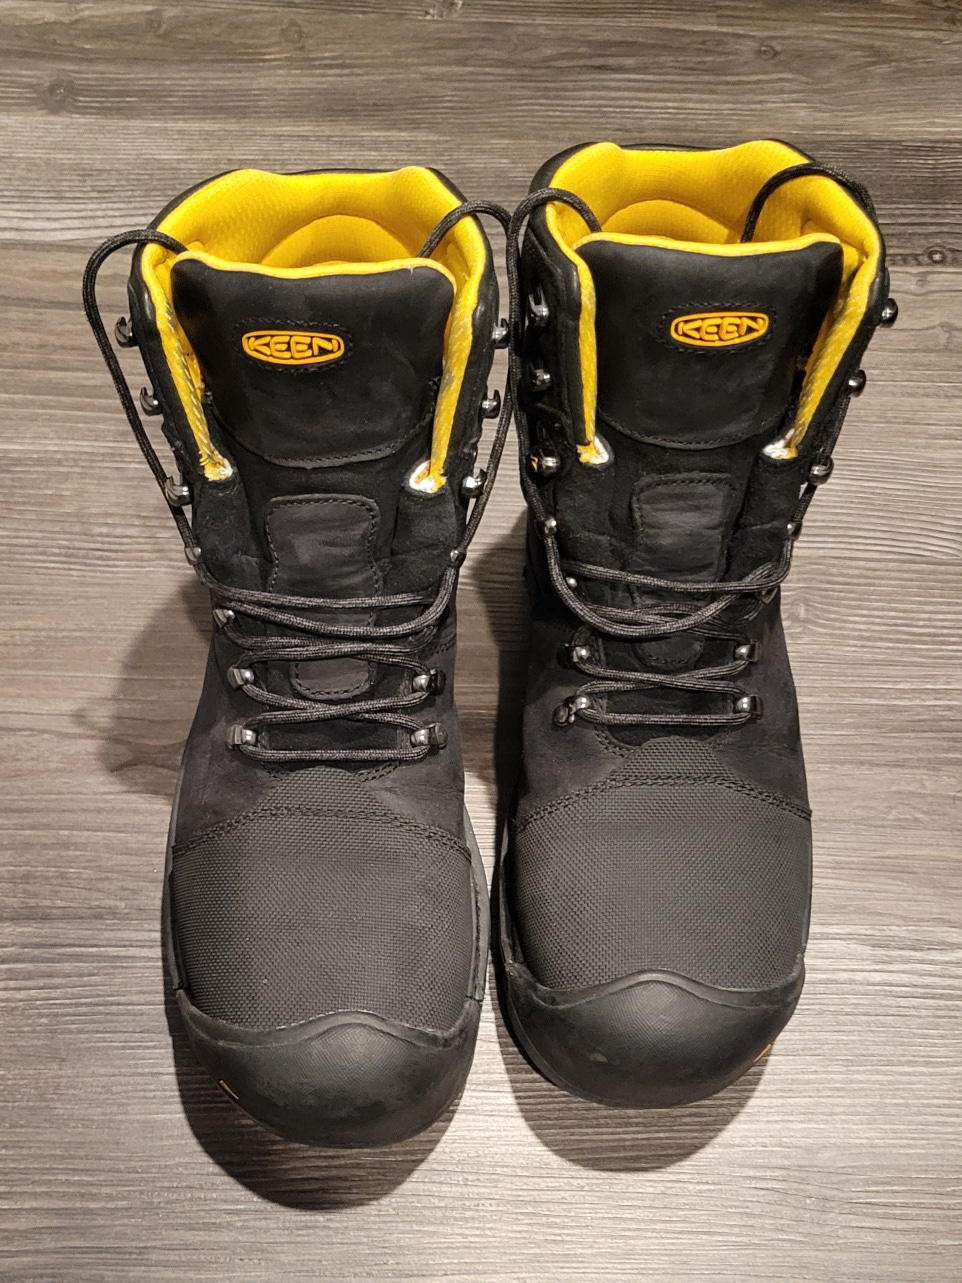 Keen Pittsburgh Boots Steel toe New Men's Size 11 (Women's 12) Hiking Boots